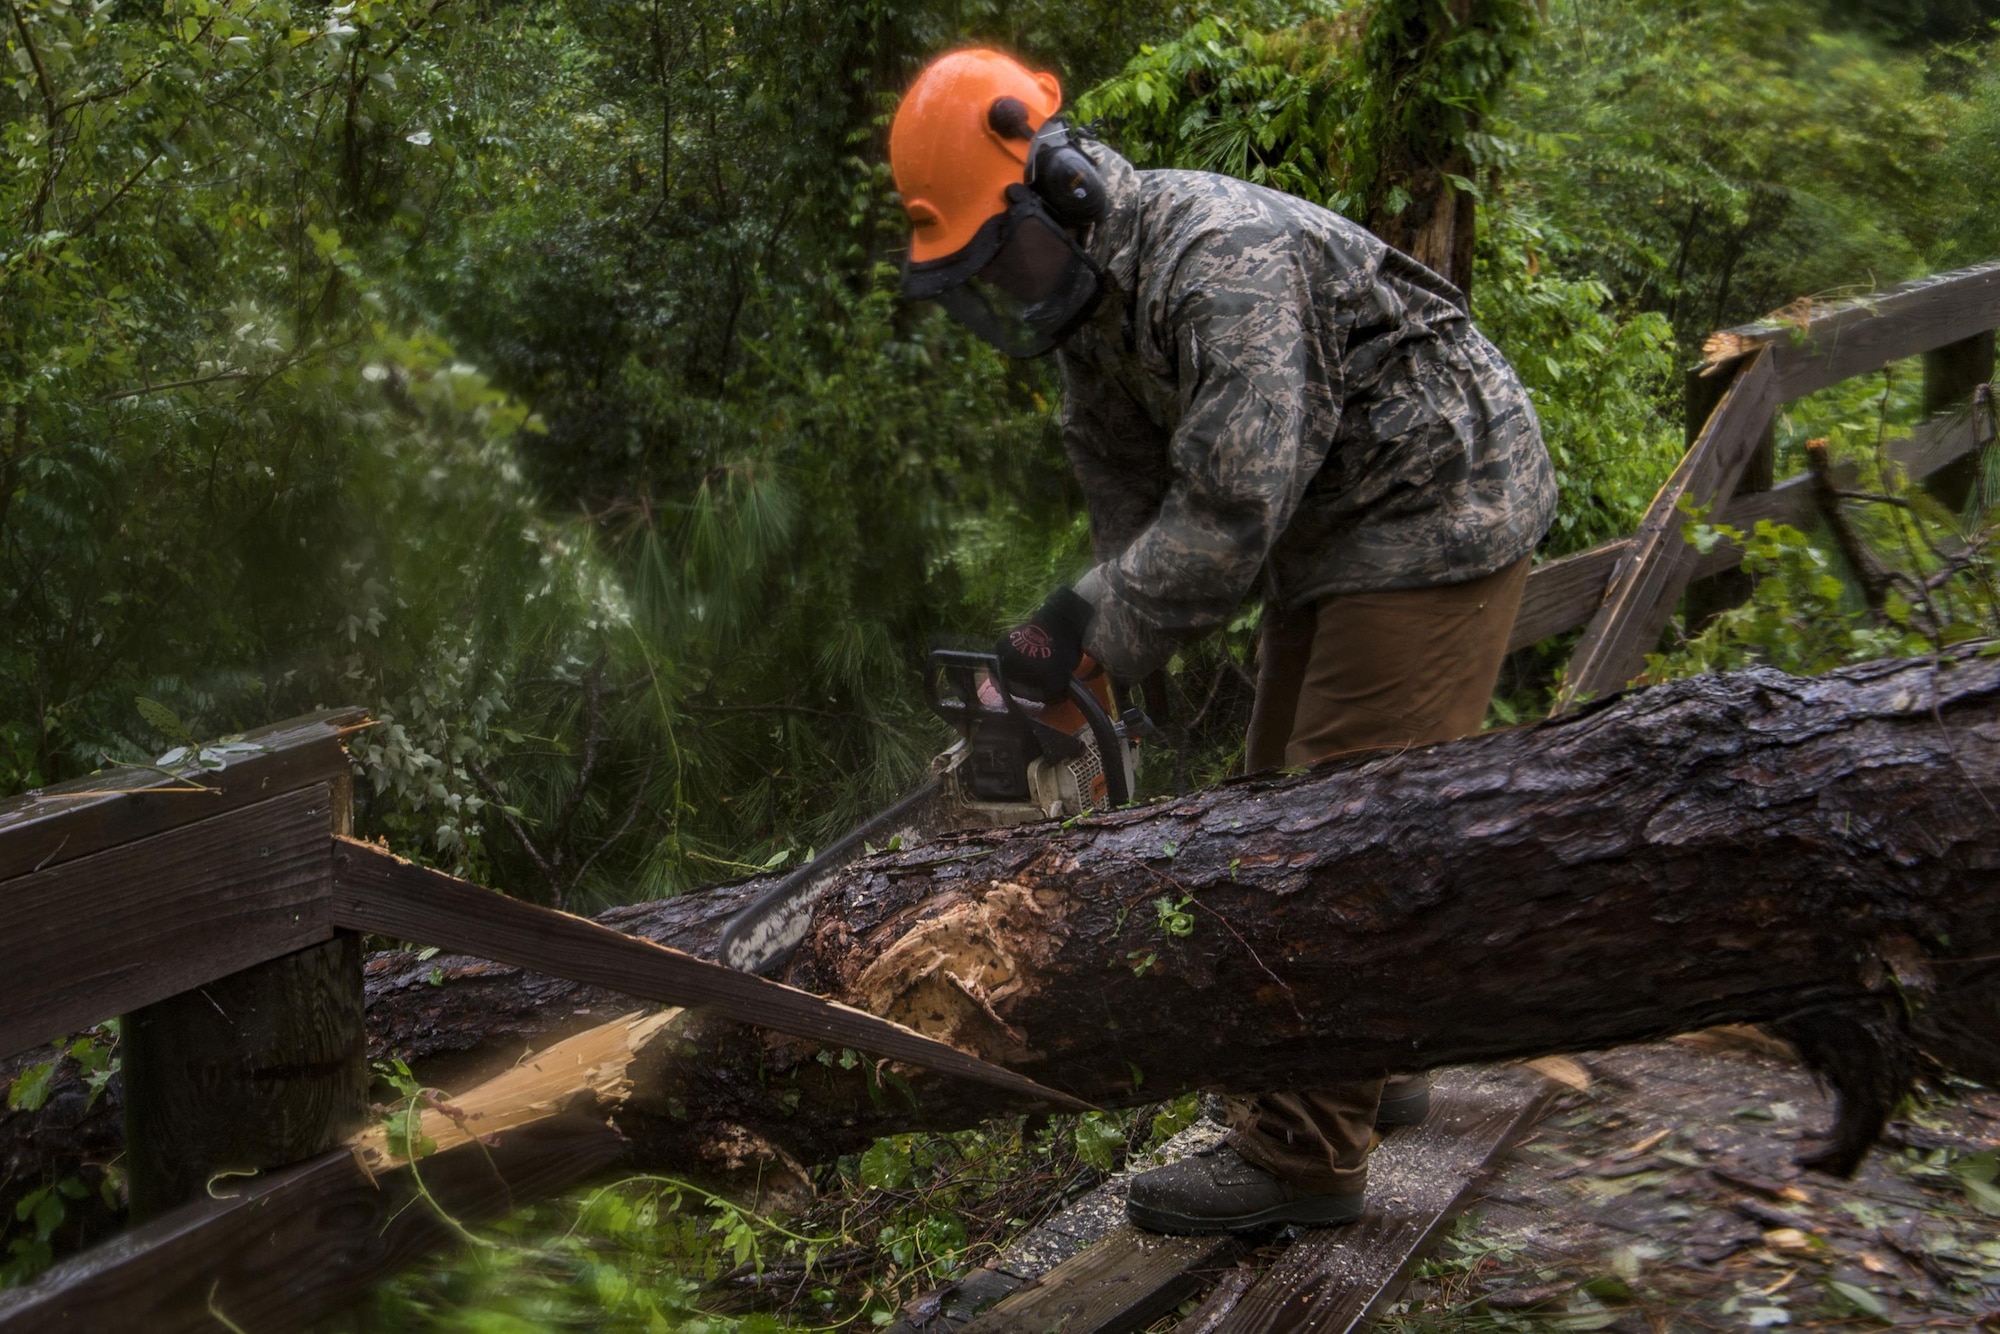 Senior Airman Justin Benito, 23rd Civil Engineer Squadron heavy equipment operator, uses a chainsaw to cut a fallen tree’s trunk, Sept. 11, 2017, at Moody Air Force Base, Ga. Moody’s ride-out team consisted of approximately 80 Airmen who were tasked with immediately responding to mission-inhibiting damage caused by Hurricane Irma. (U.S. Air Force photo by Airman 1st Class Daniel Snider)